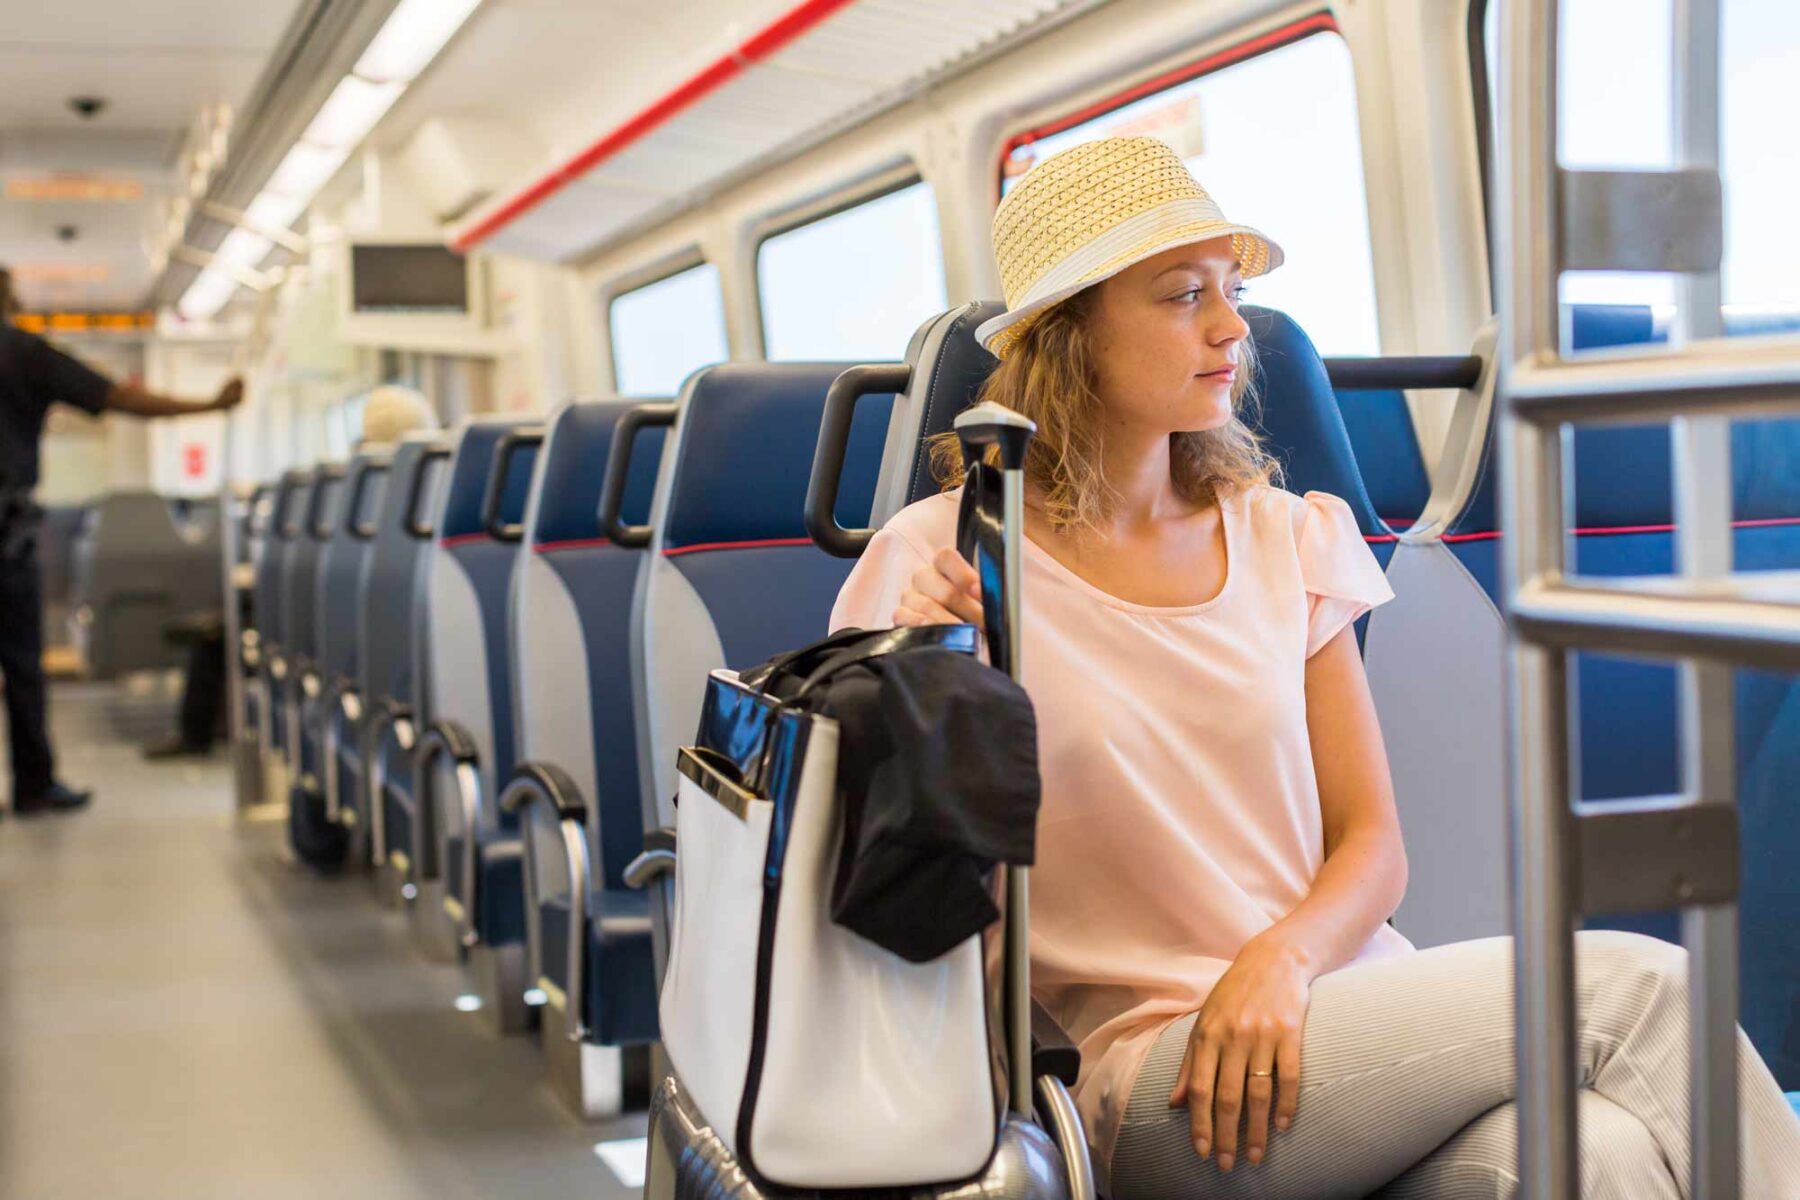 Woman riding a train with a bag